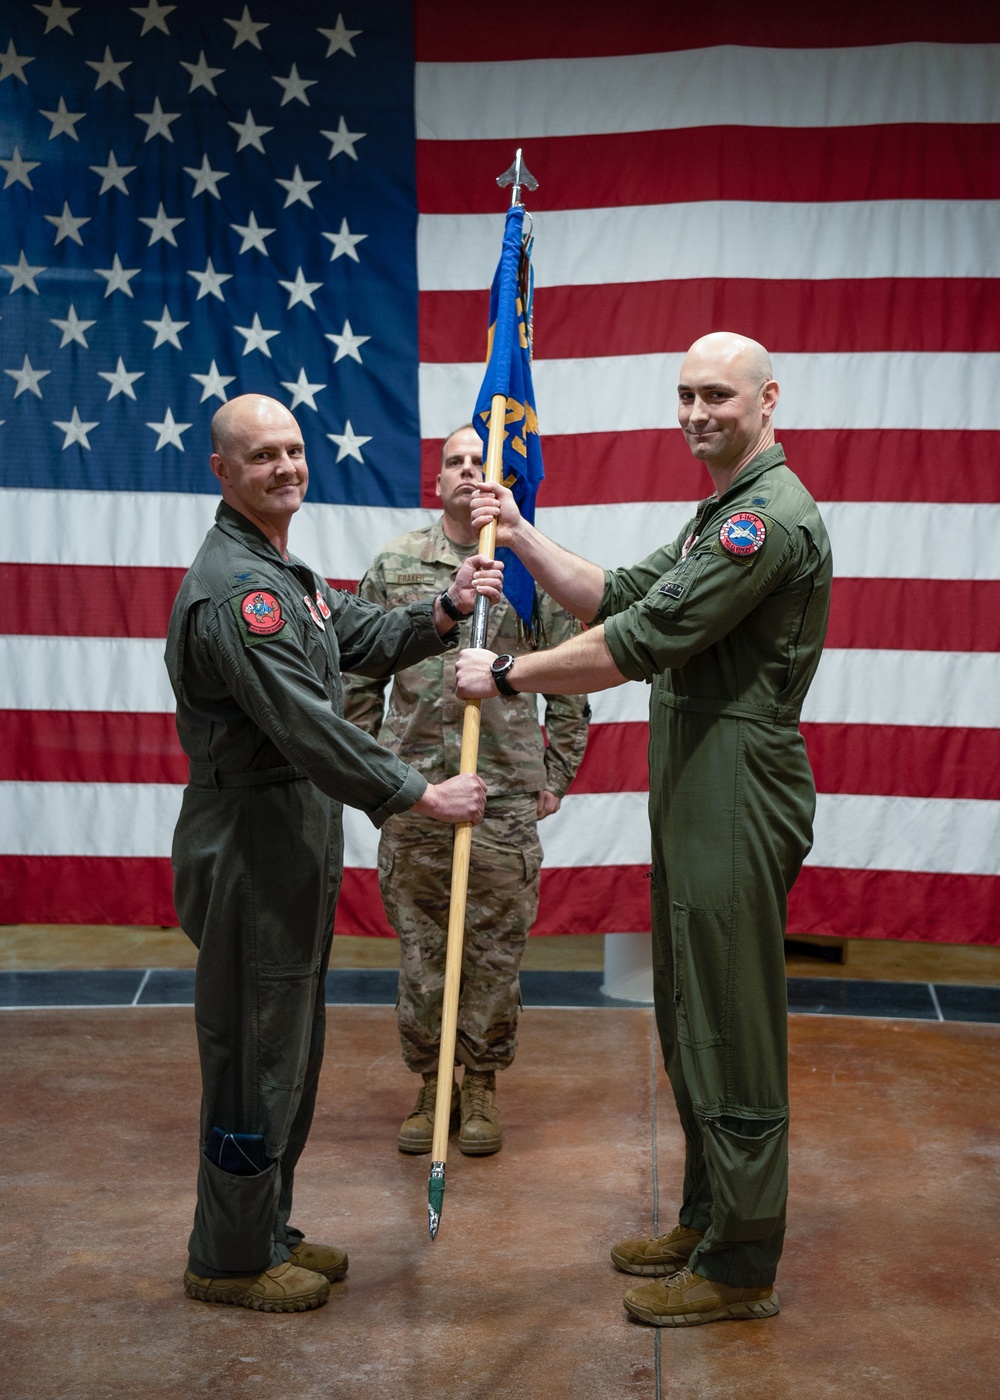 Lt. Col. Michael Leary takes command of the 125th Fighter Squadron